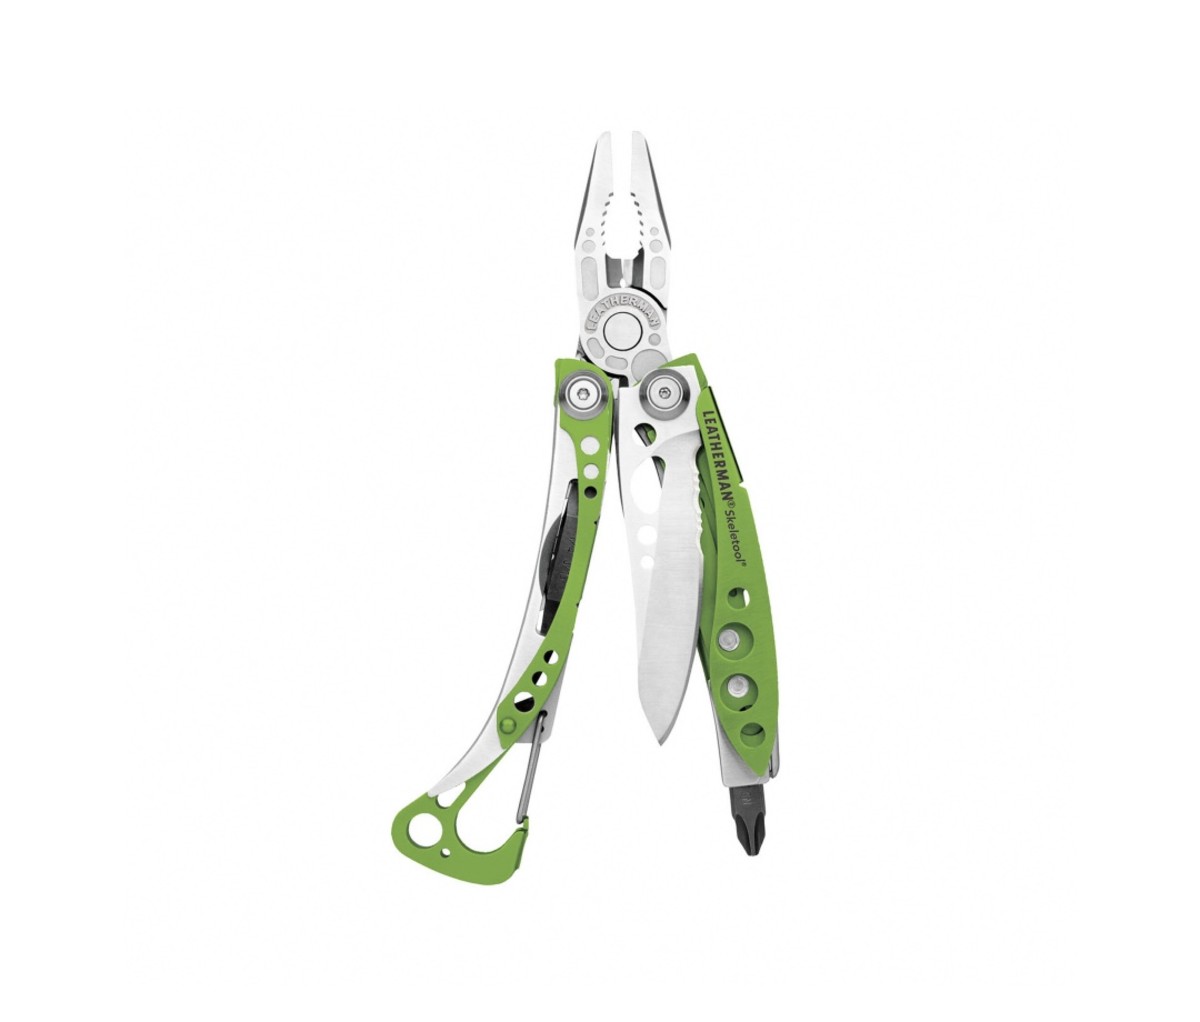 Green and silver multi-tool on a white background.